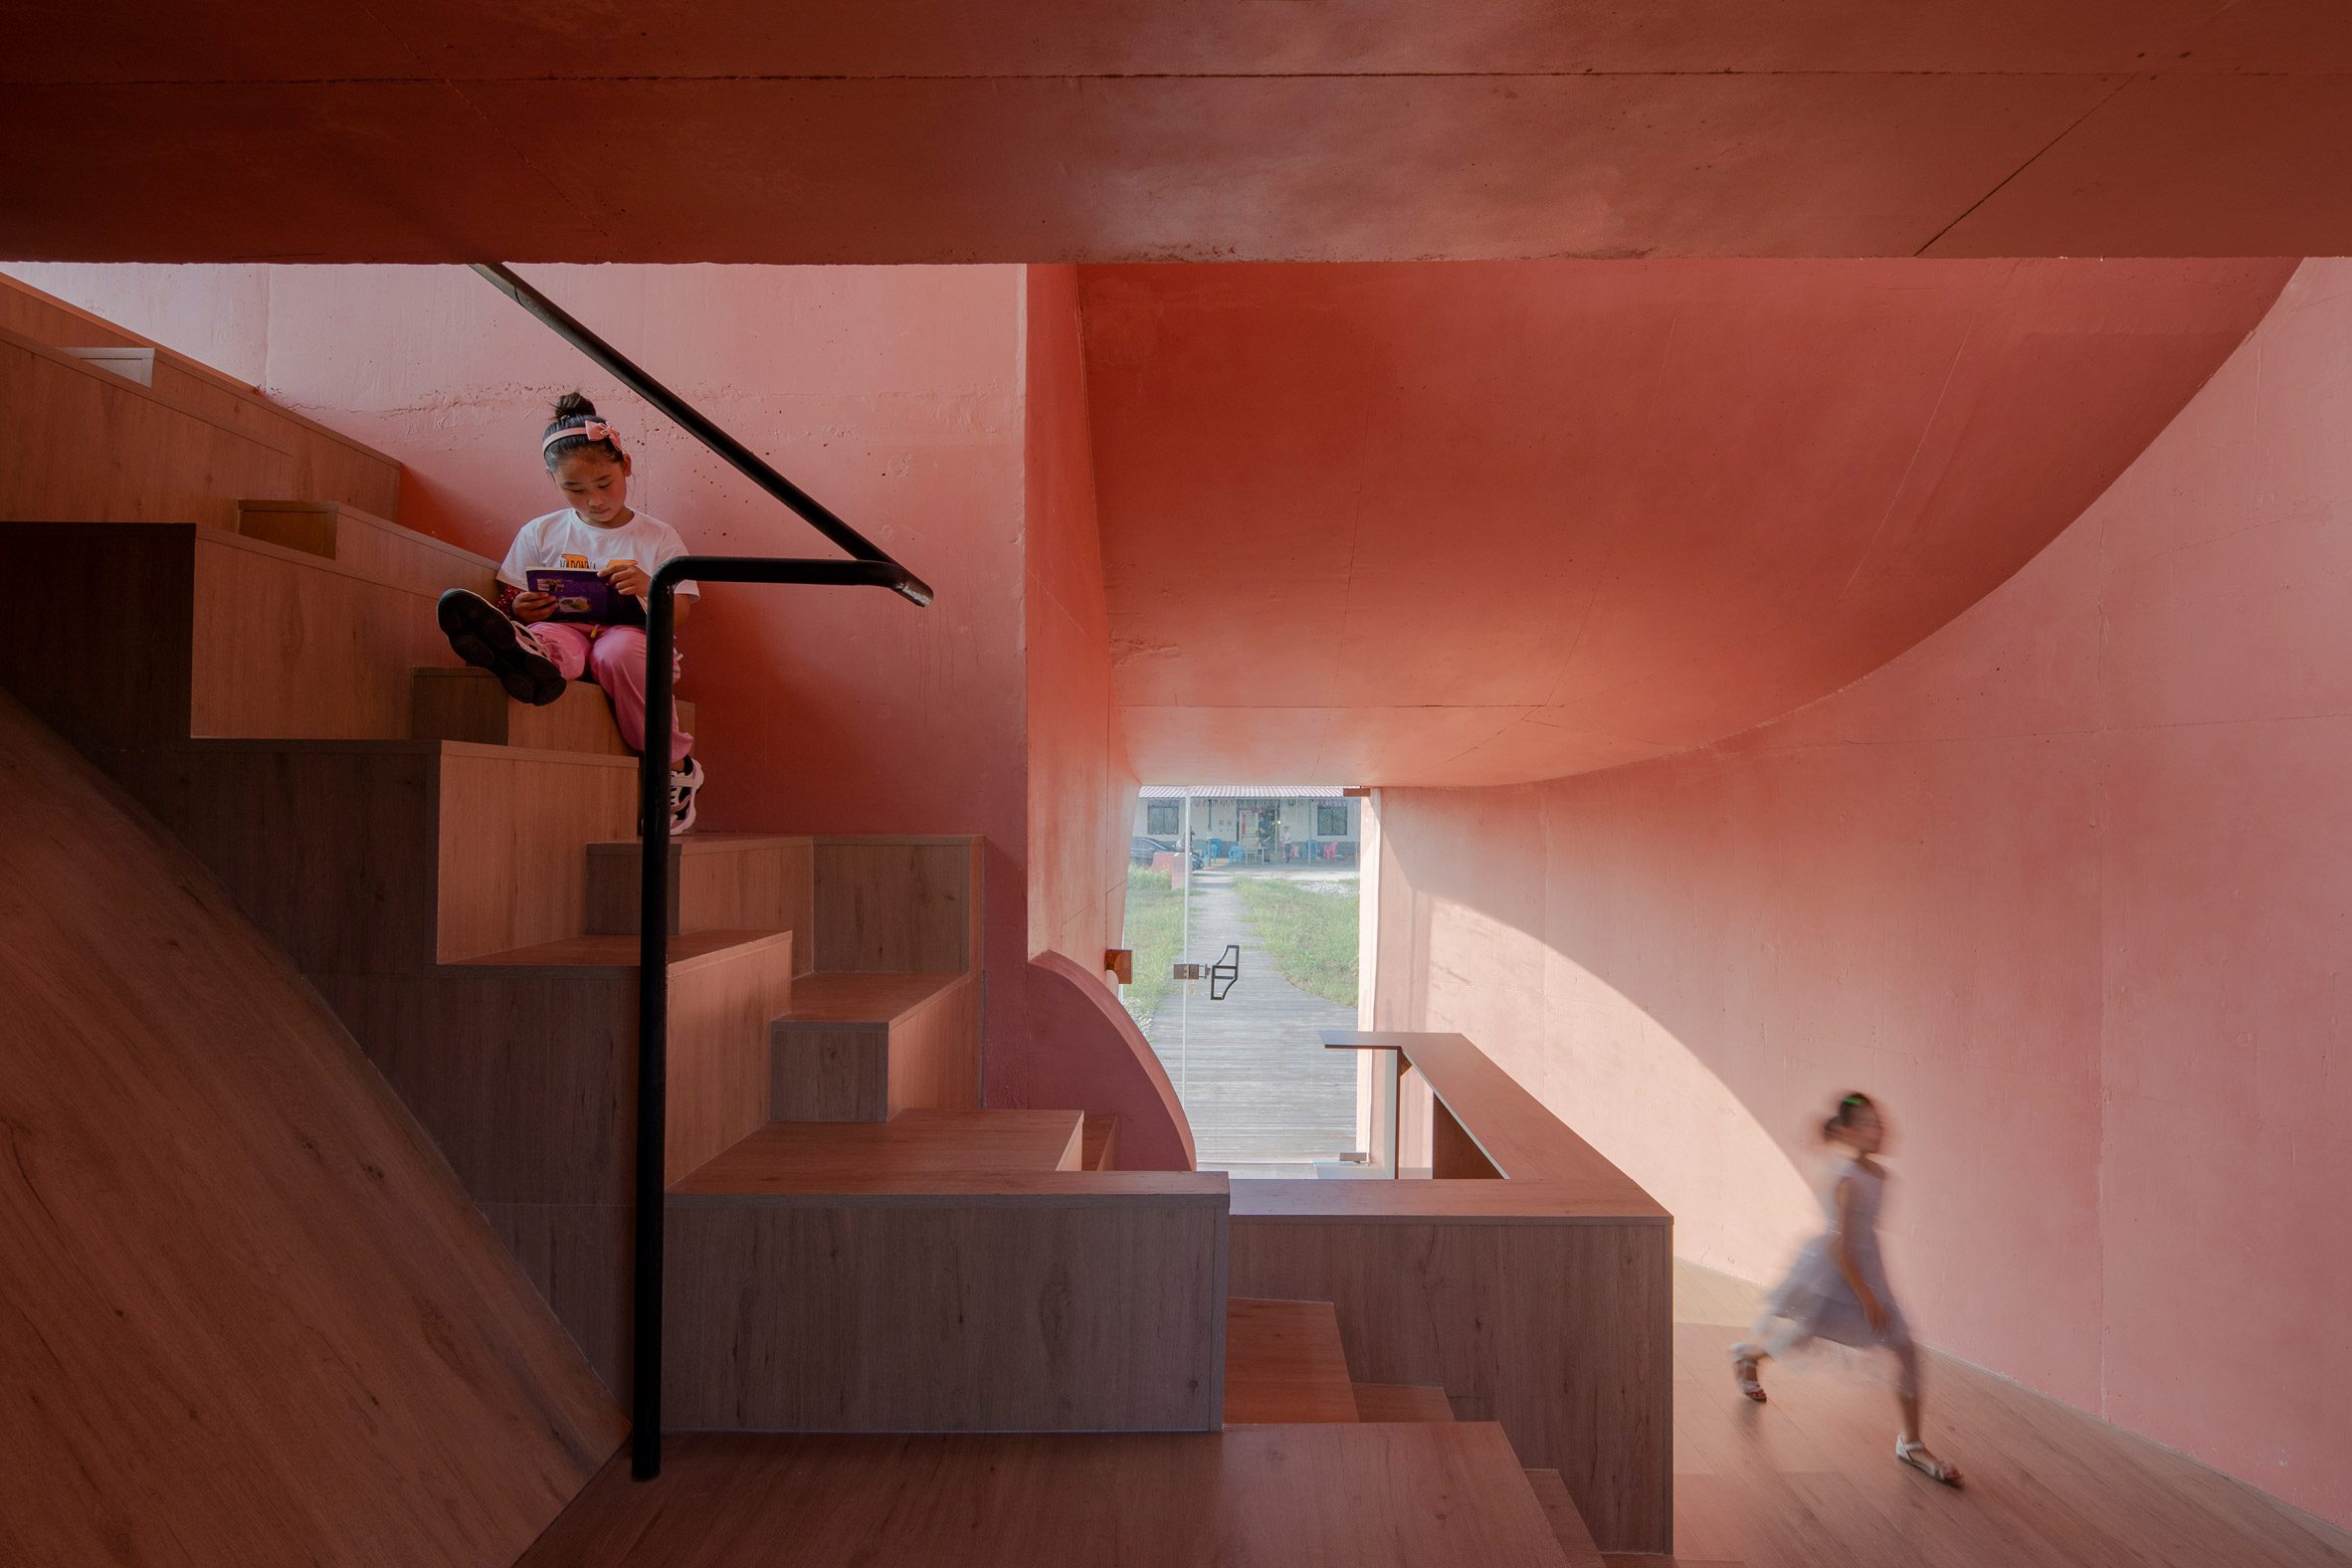 peach-hut-atelier-xi-china-surfaces-reporter